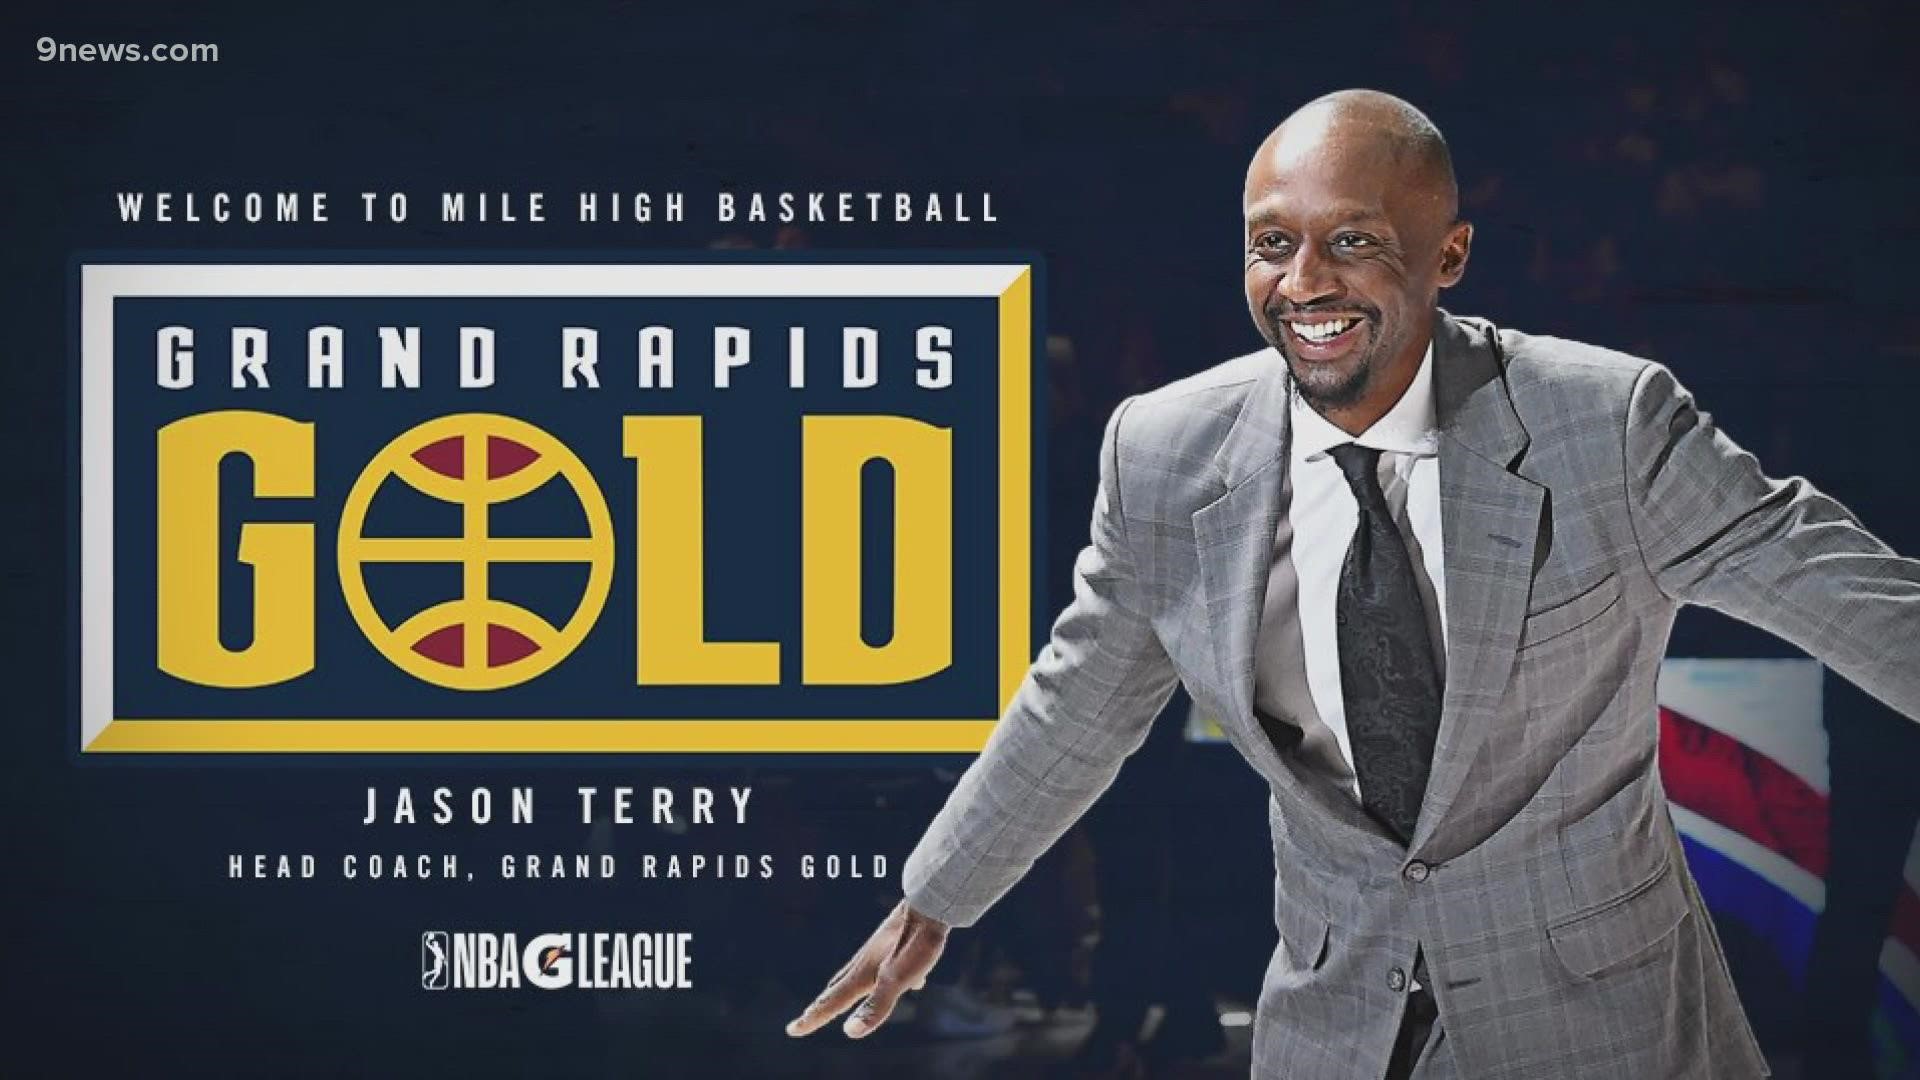 Former NBA champion Jason Terry has been named the head coach of the Grand Rapids Gold.